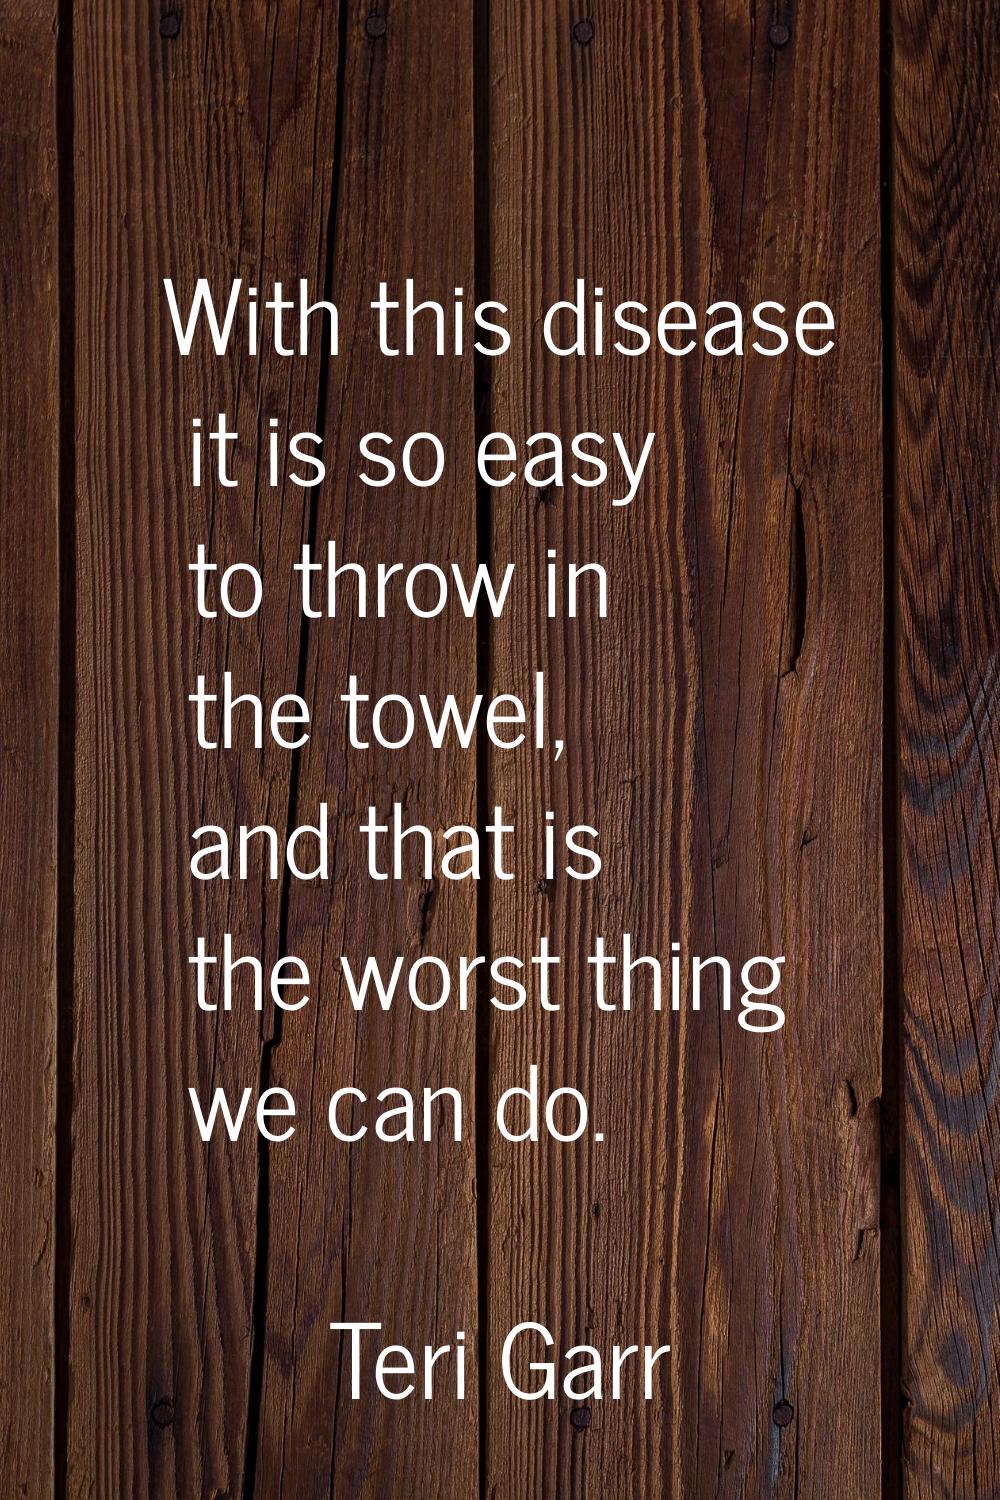 With this disease it is so easy to throw in the towel, and that is the worst thing we can do.